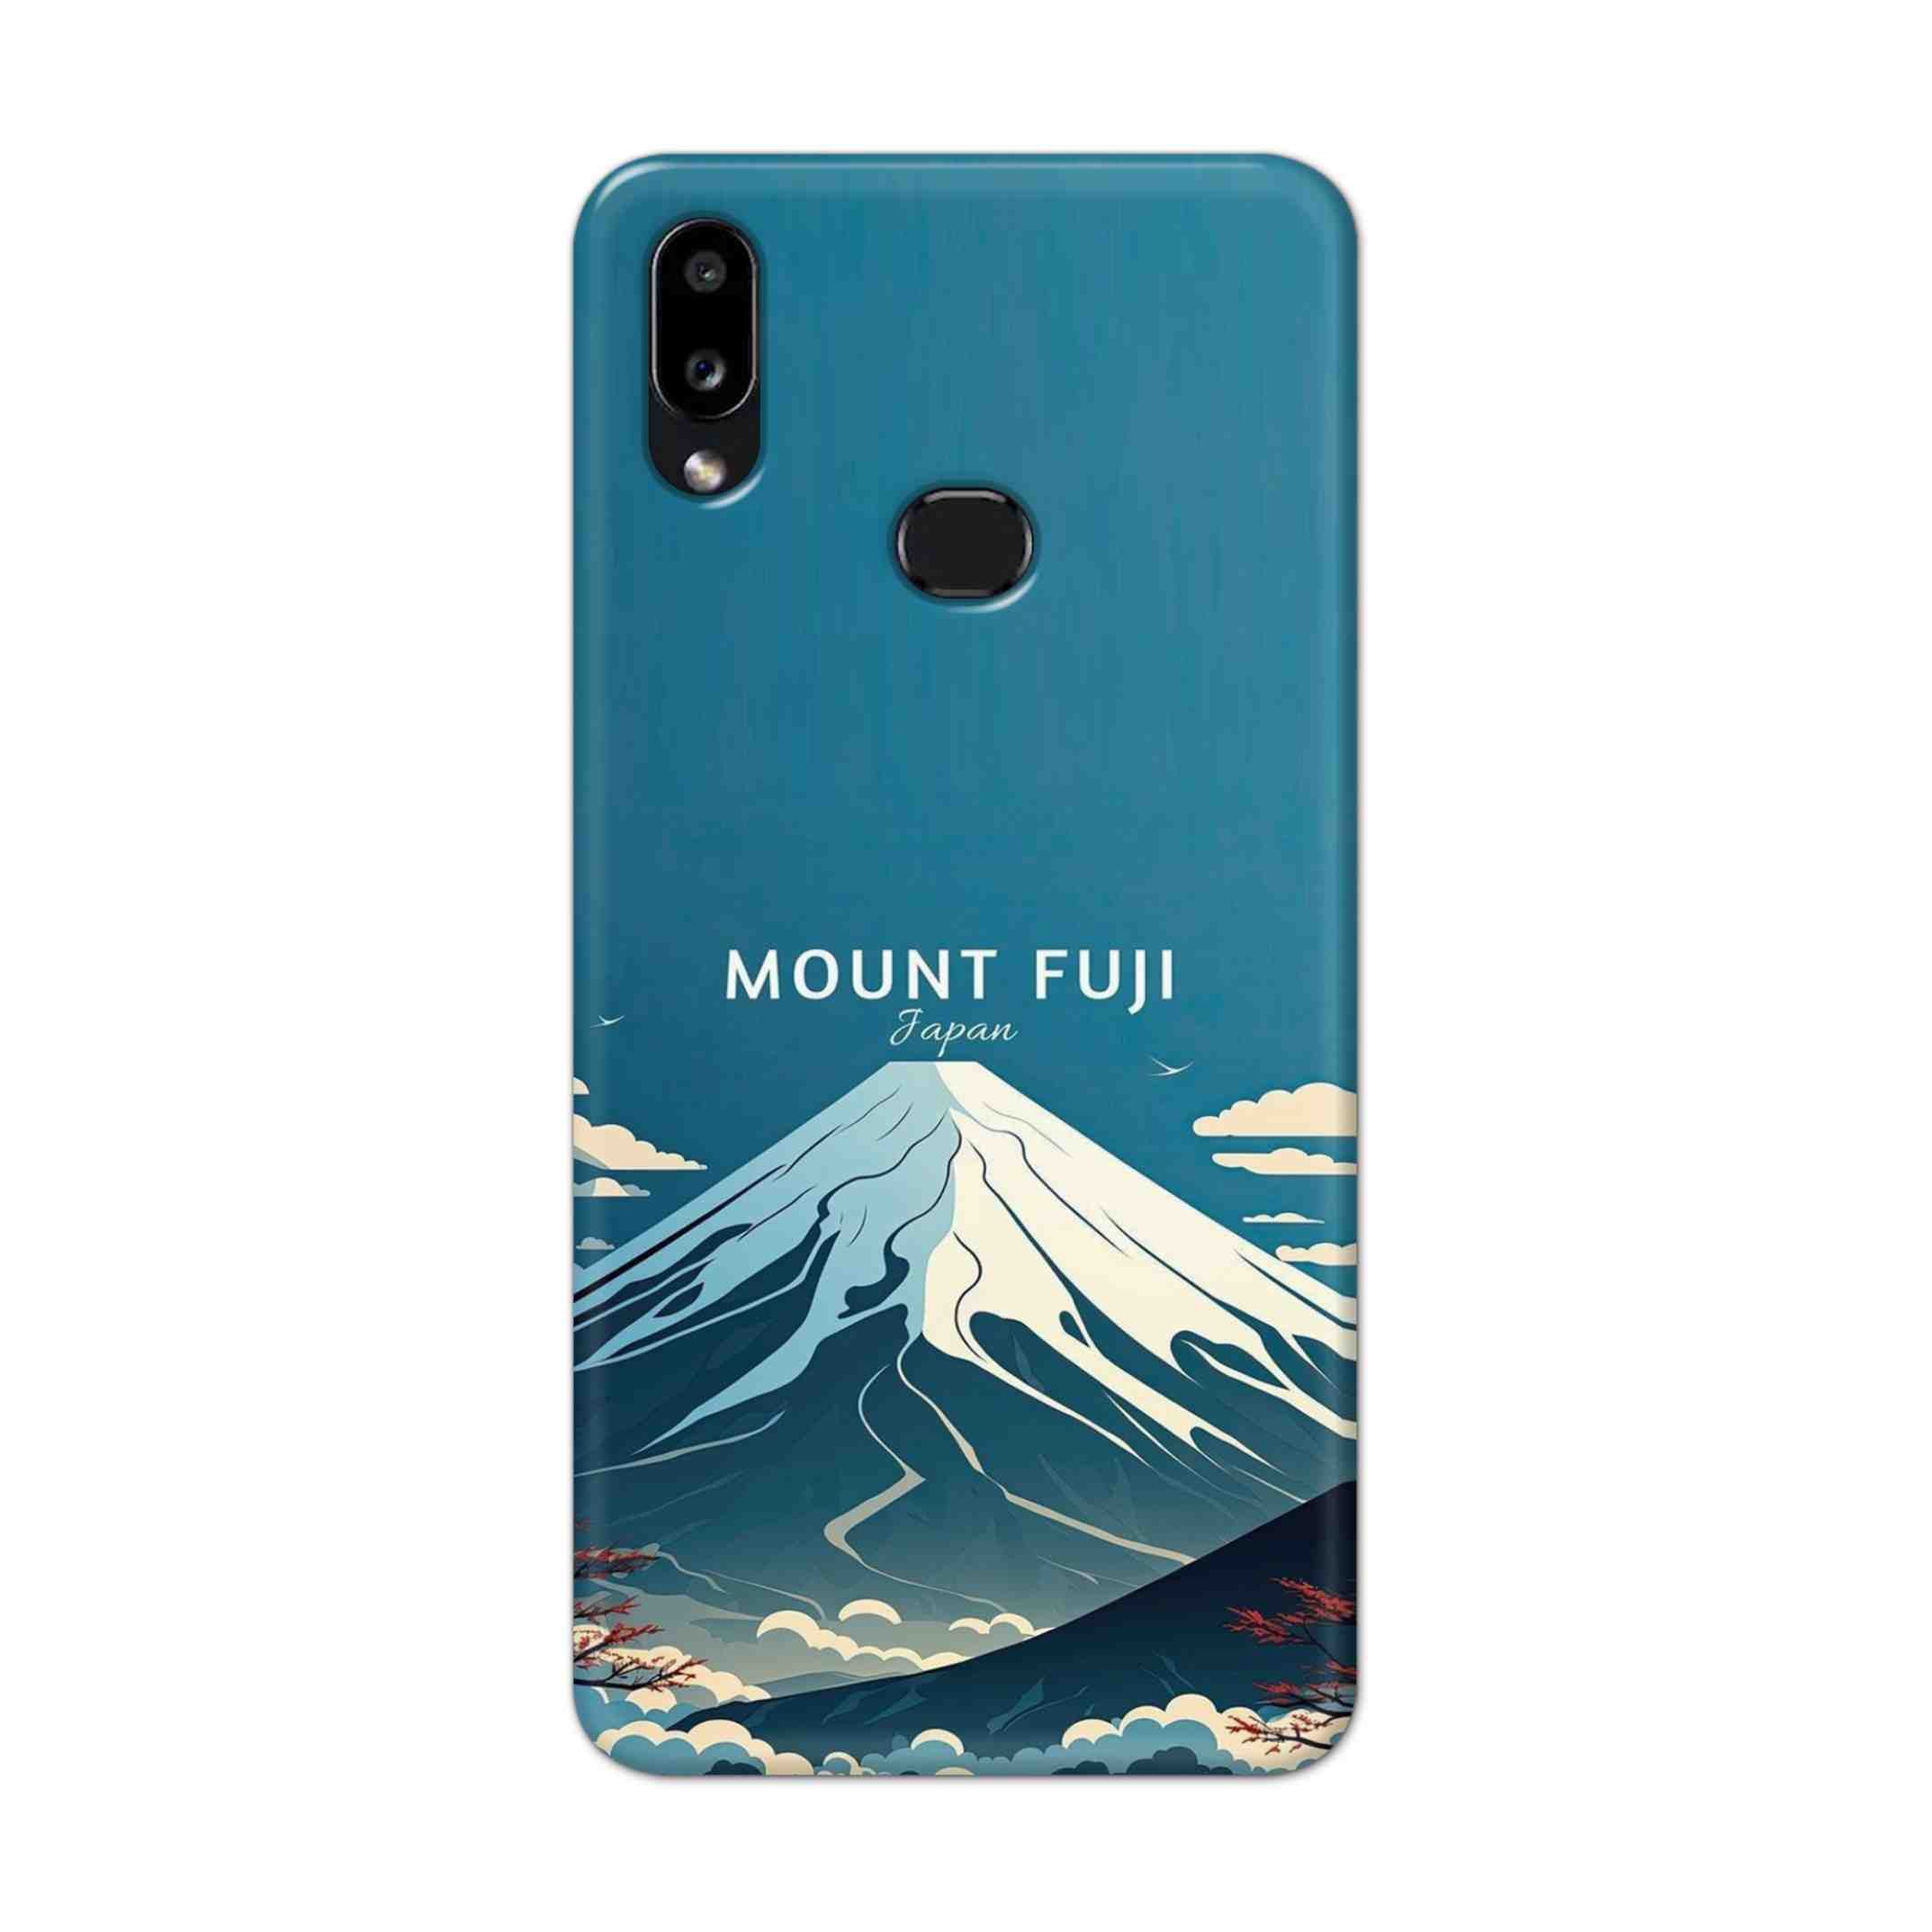 Buy Mount Fuji Hard Back Mobile Phone Case Cover For Samsung Galaxy M01s Online